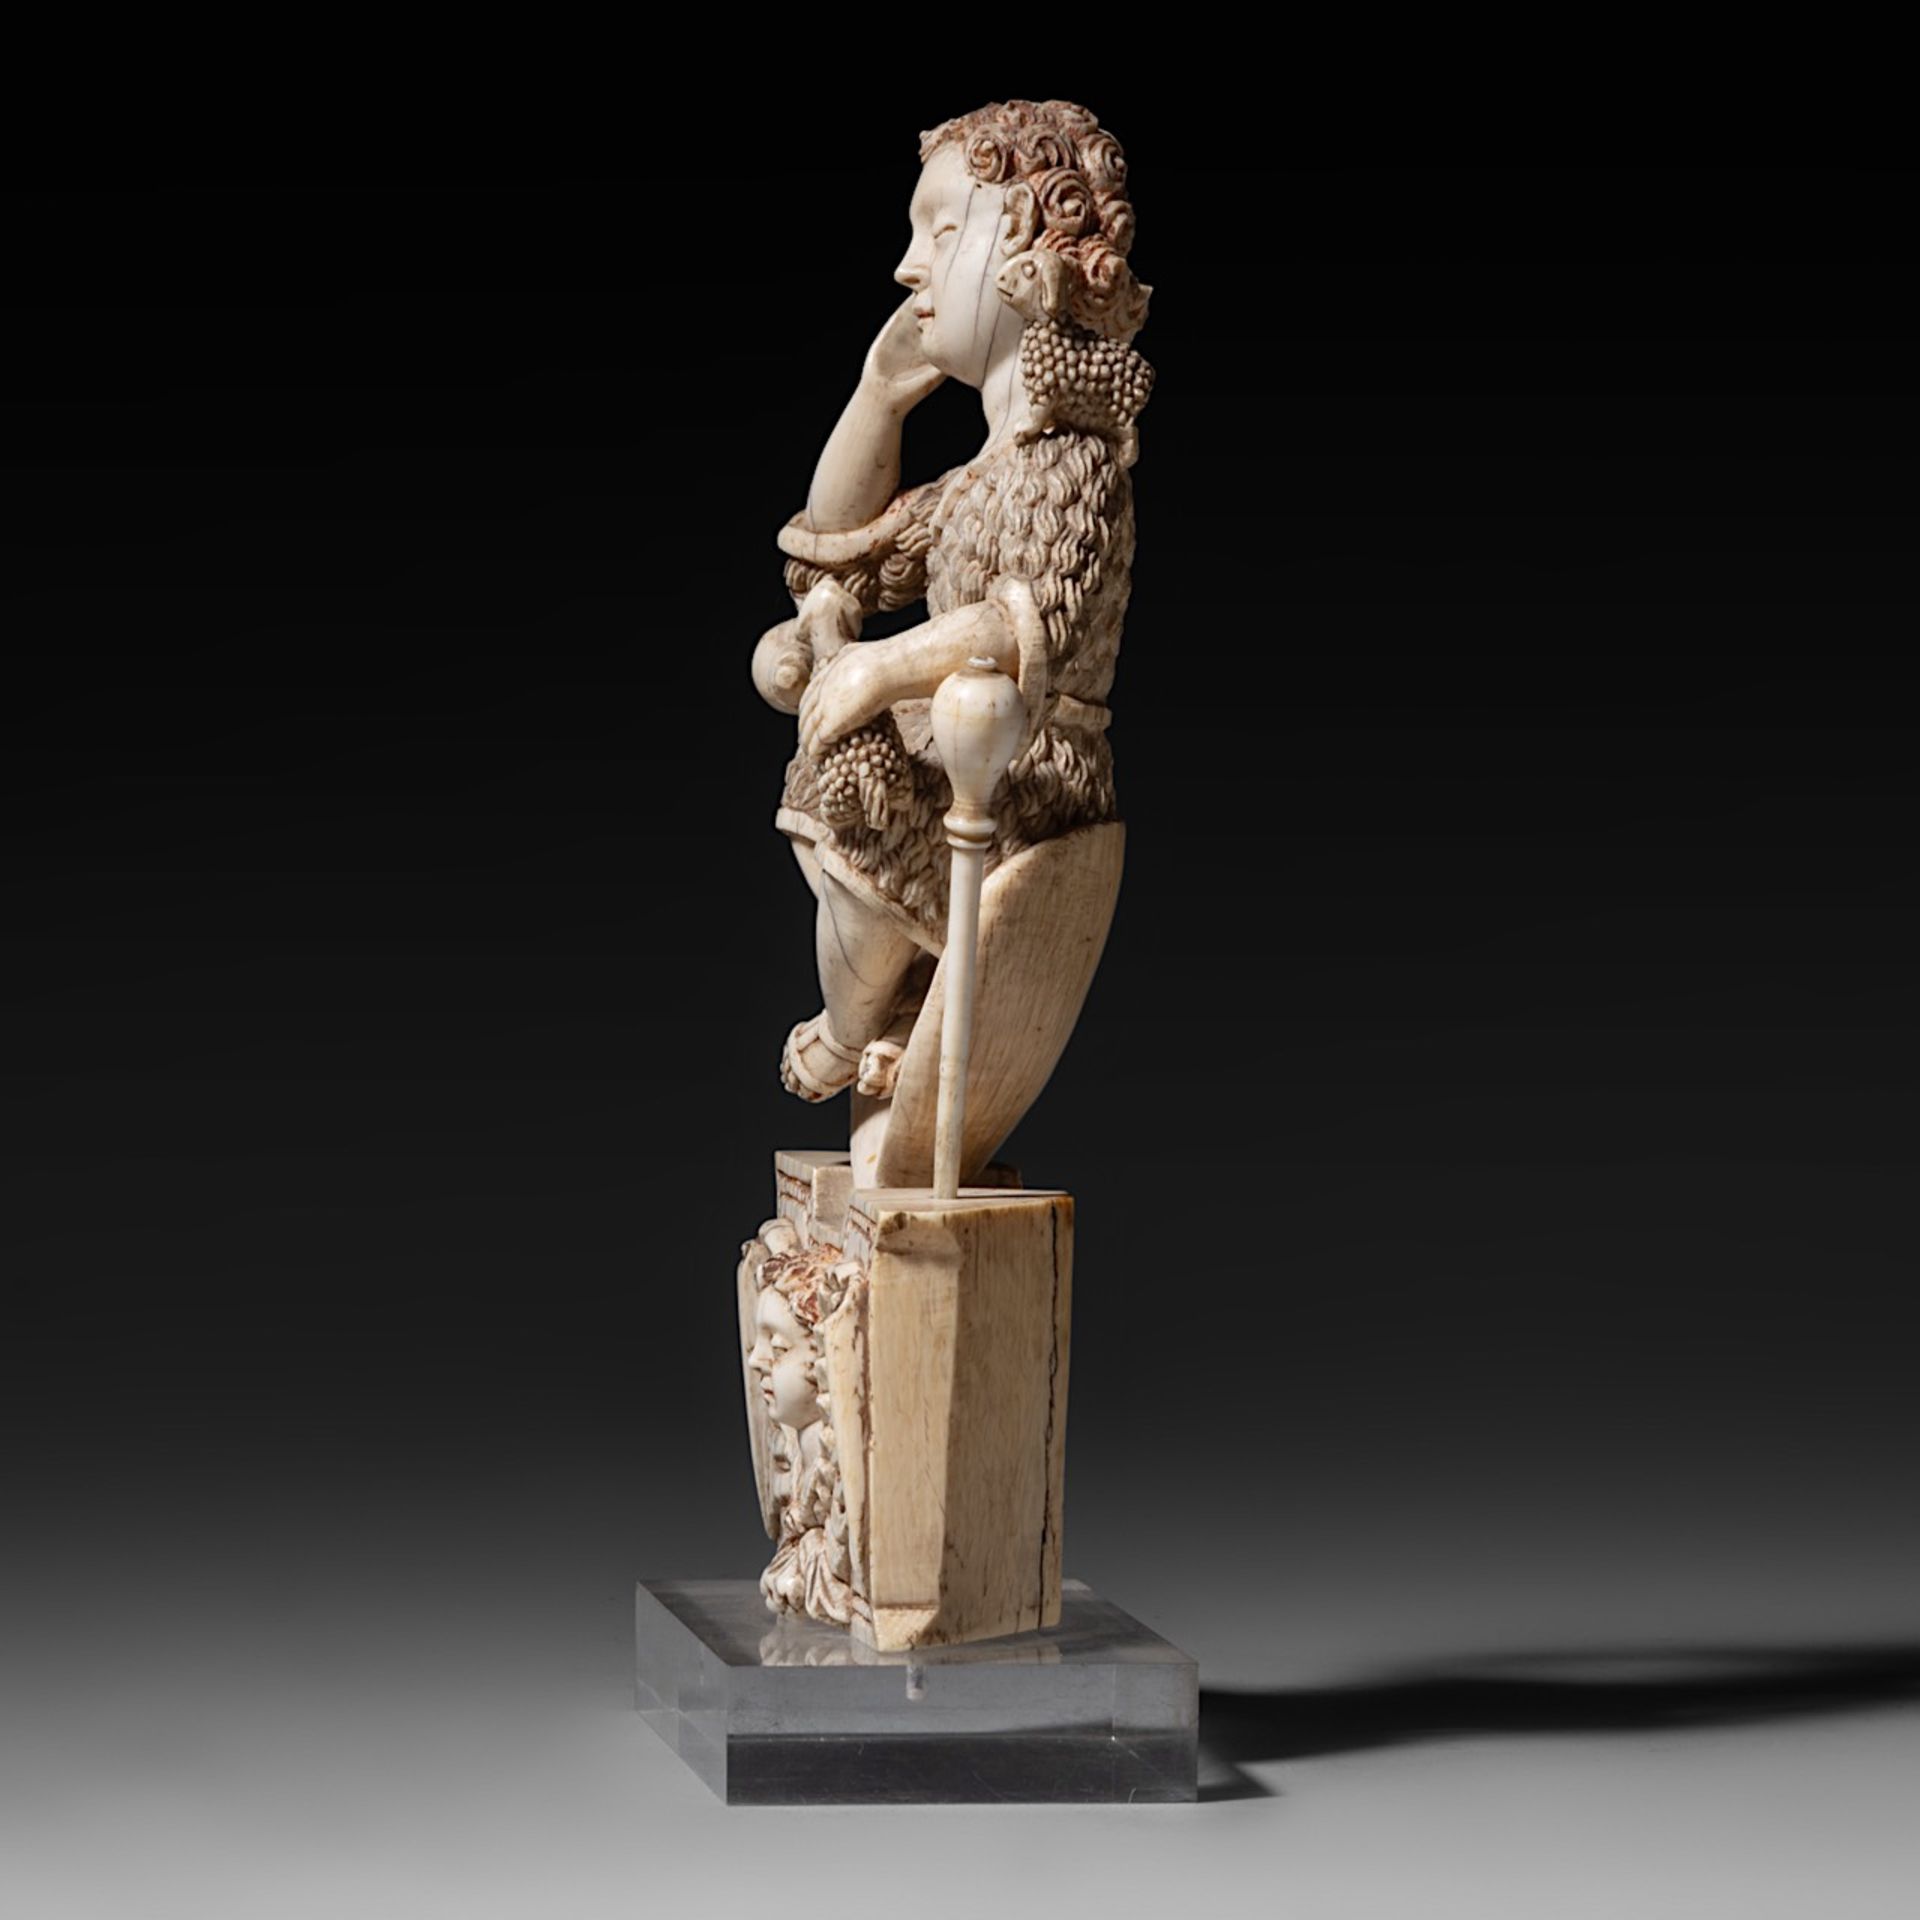 A large 17th-18thC Goa ivory carving of Christ represented as the Good Shepherd, ivory H 22,5 cm - t - Image 4 of 8